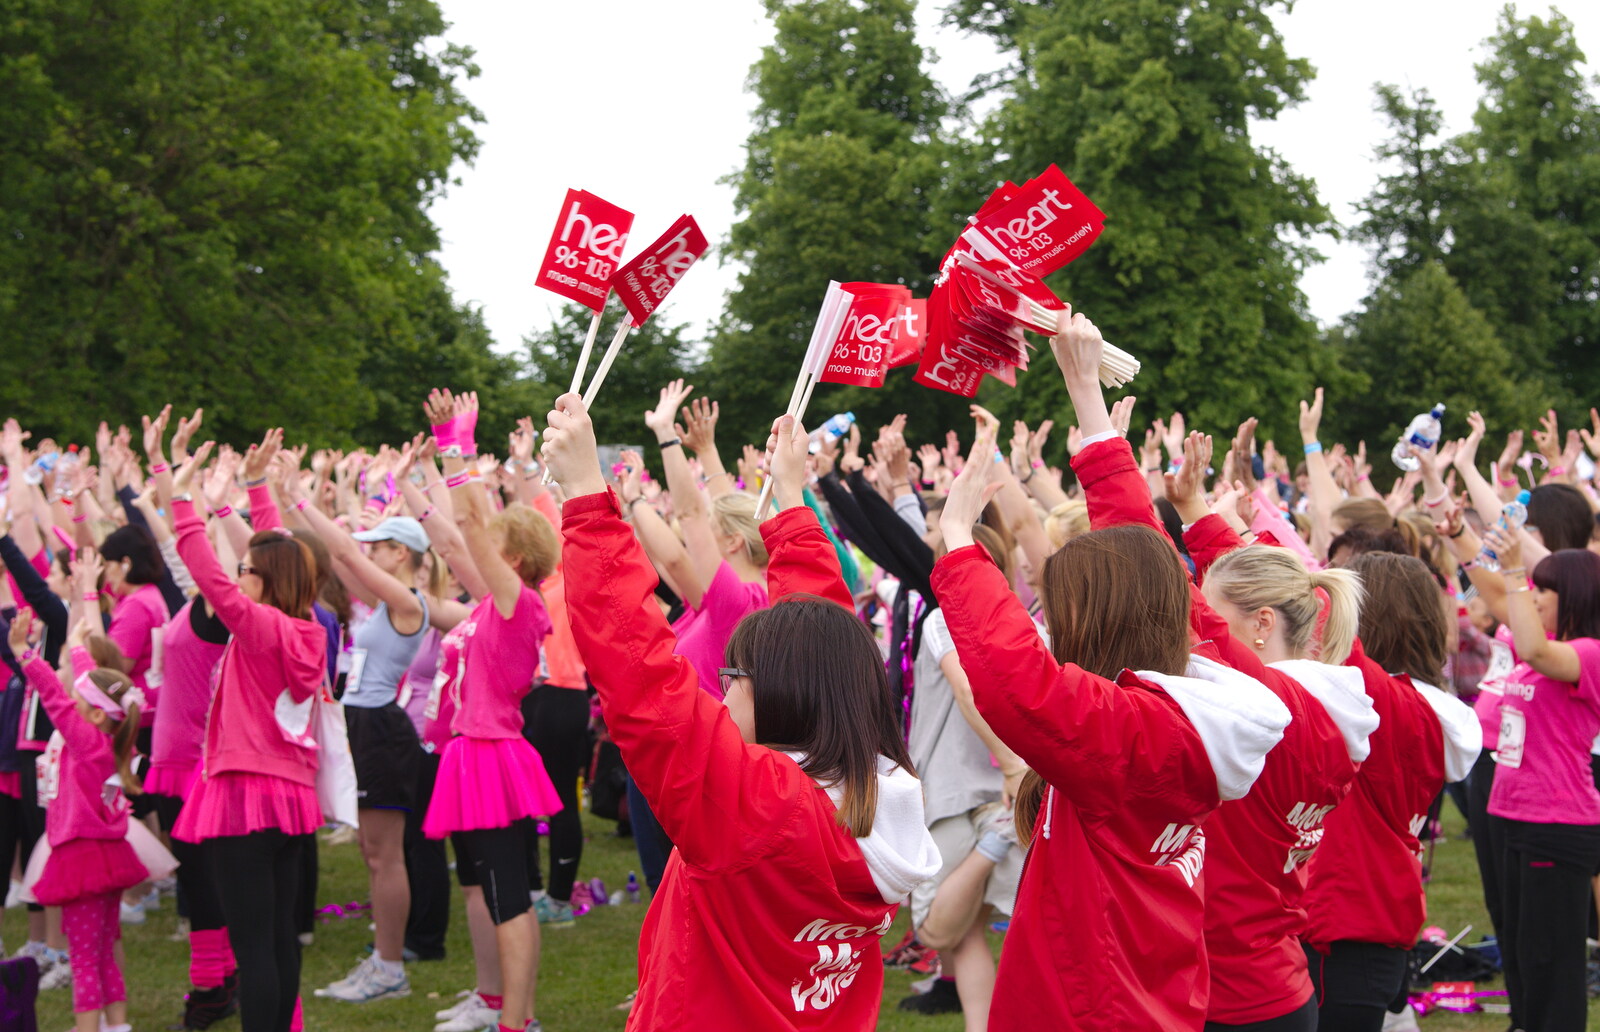 The Heart FM crew wave Heart flags around from Isobel's Race For Life, Chantry Park, Ipswich - 11th June 2014